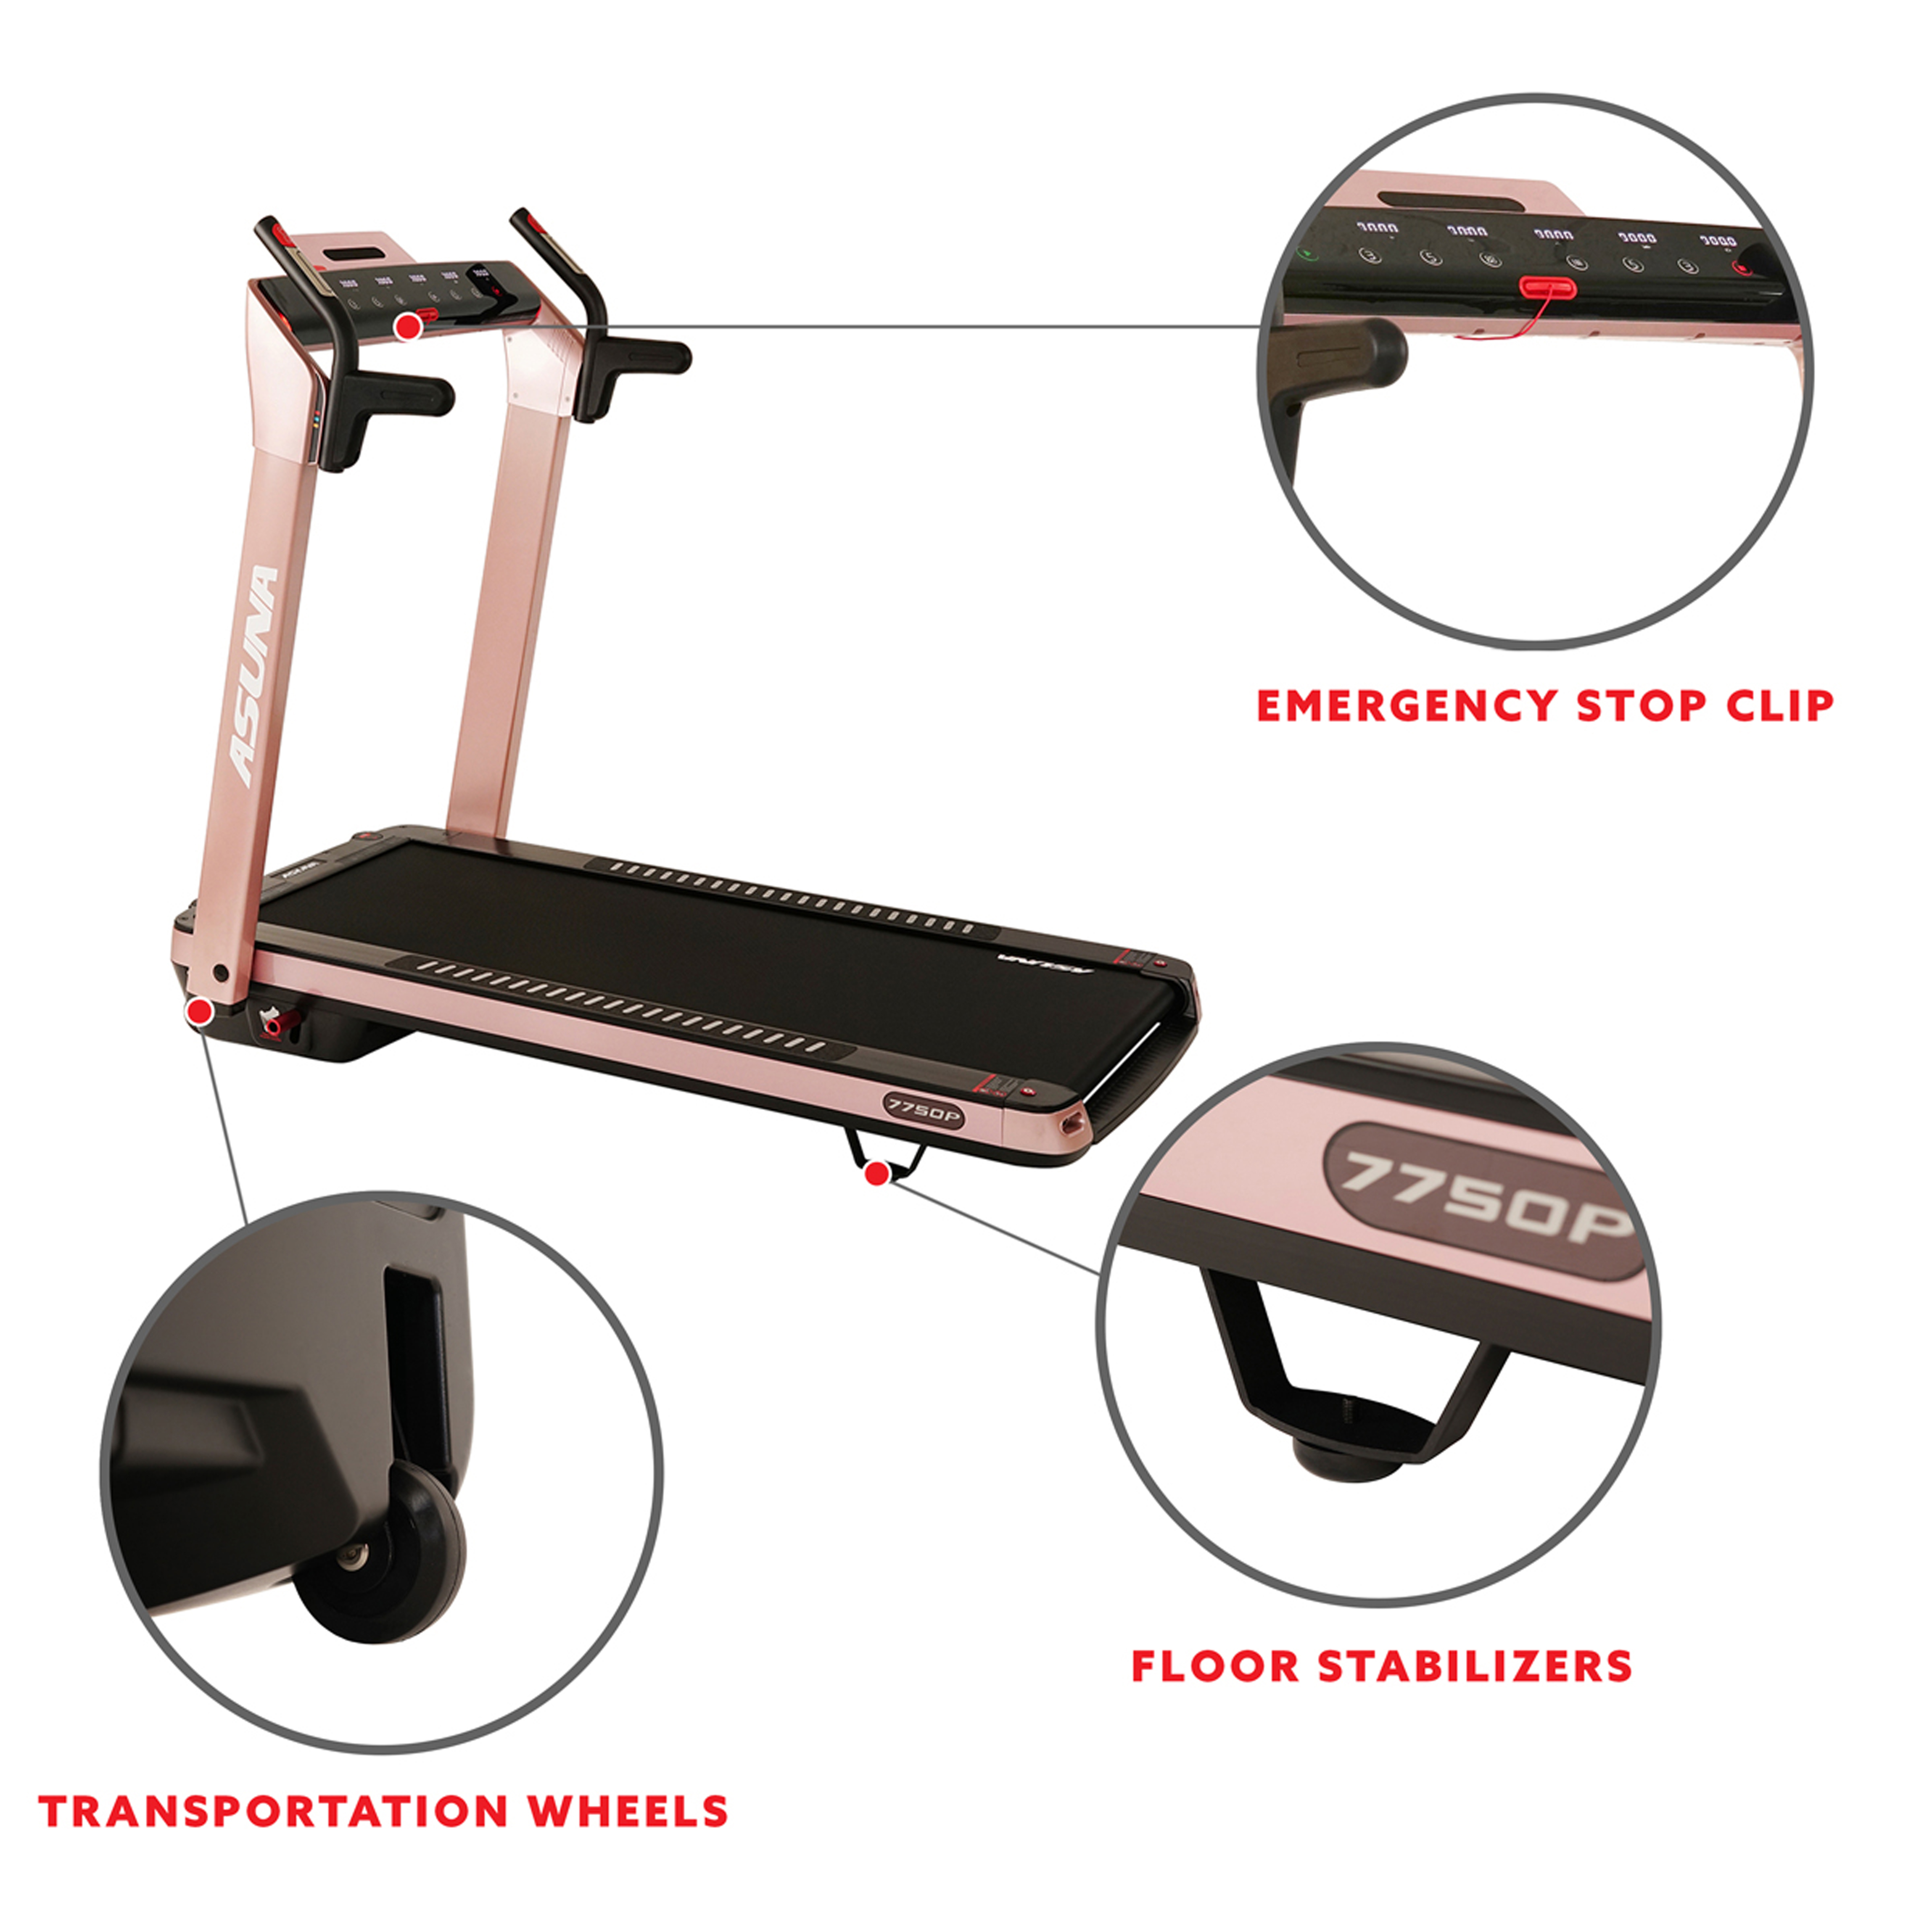 ASUNA SpaceFlex Motorized Treadmill with Auto Incline, Wide Folding Belt - 7750Pink - image 5 of 9